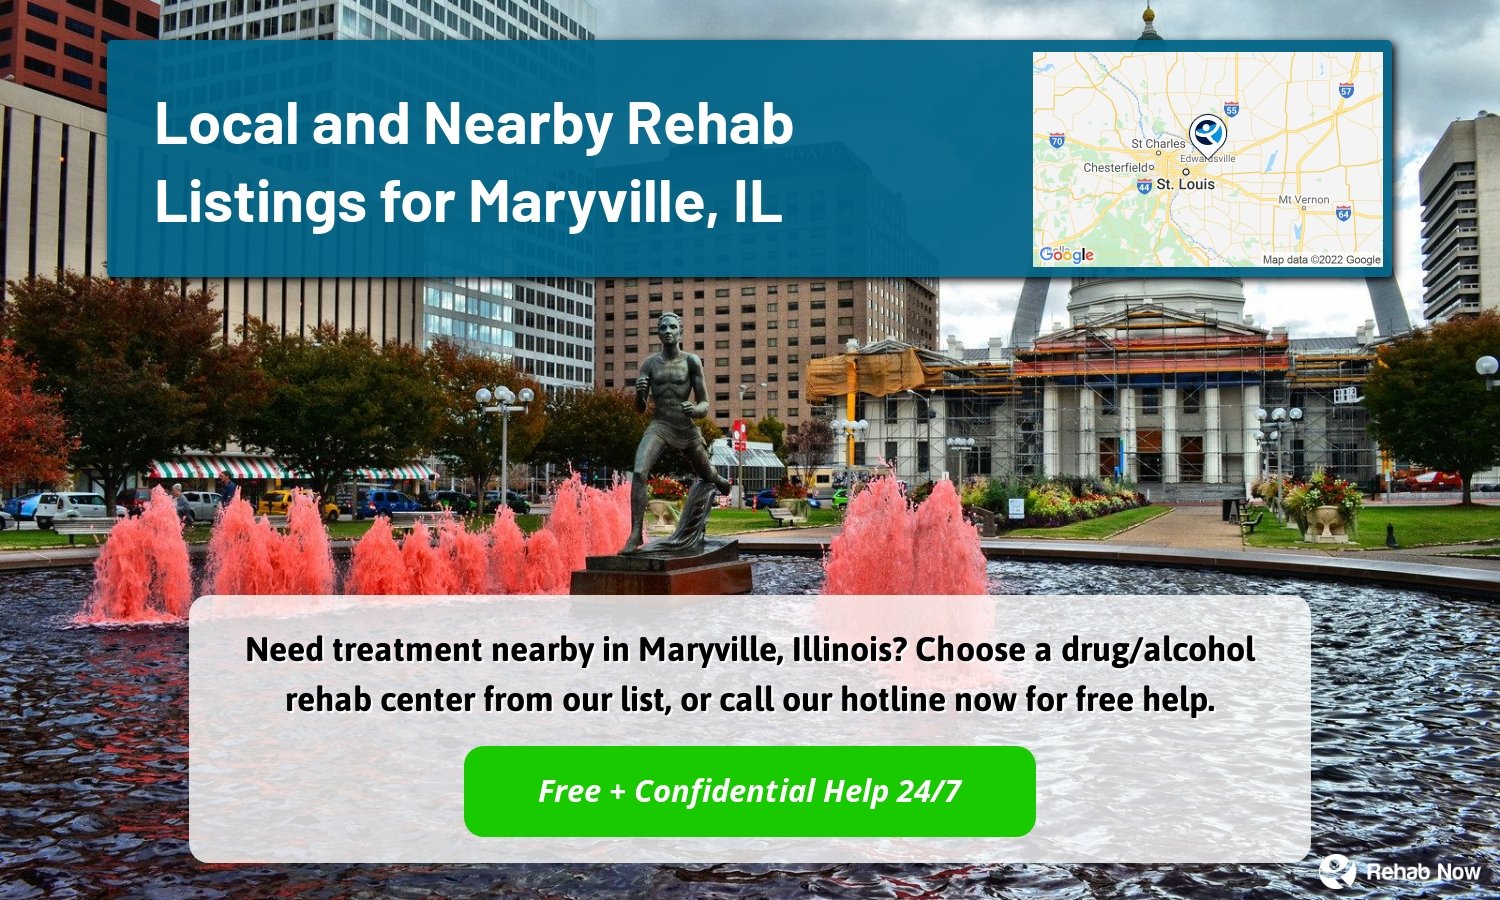 Need treatment nearby in Maryville, Illinois? Choose a drug/alcohol rehab center from our list, or call our hotline now for free help.